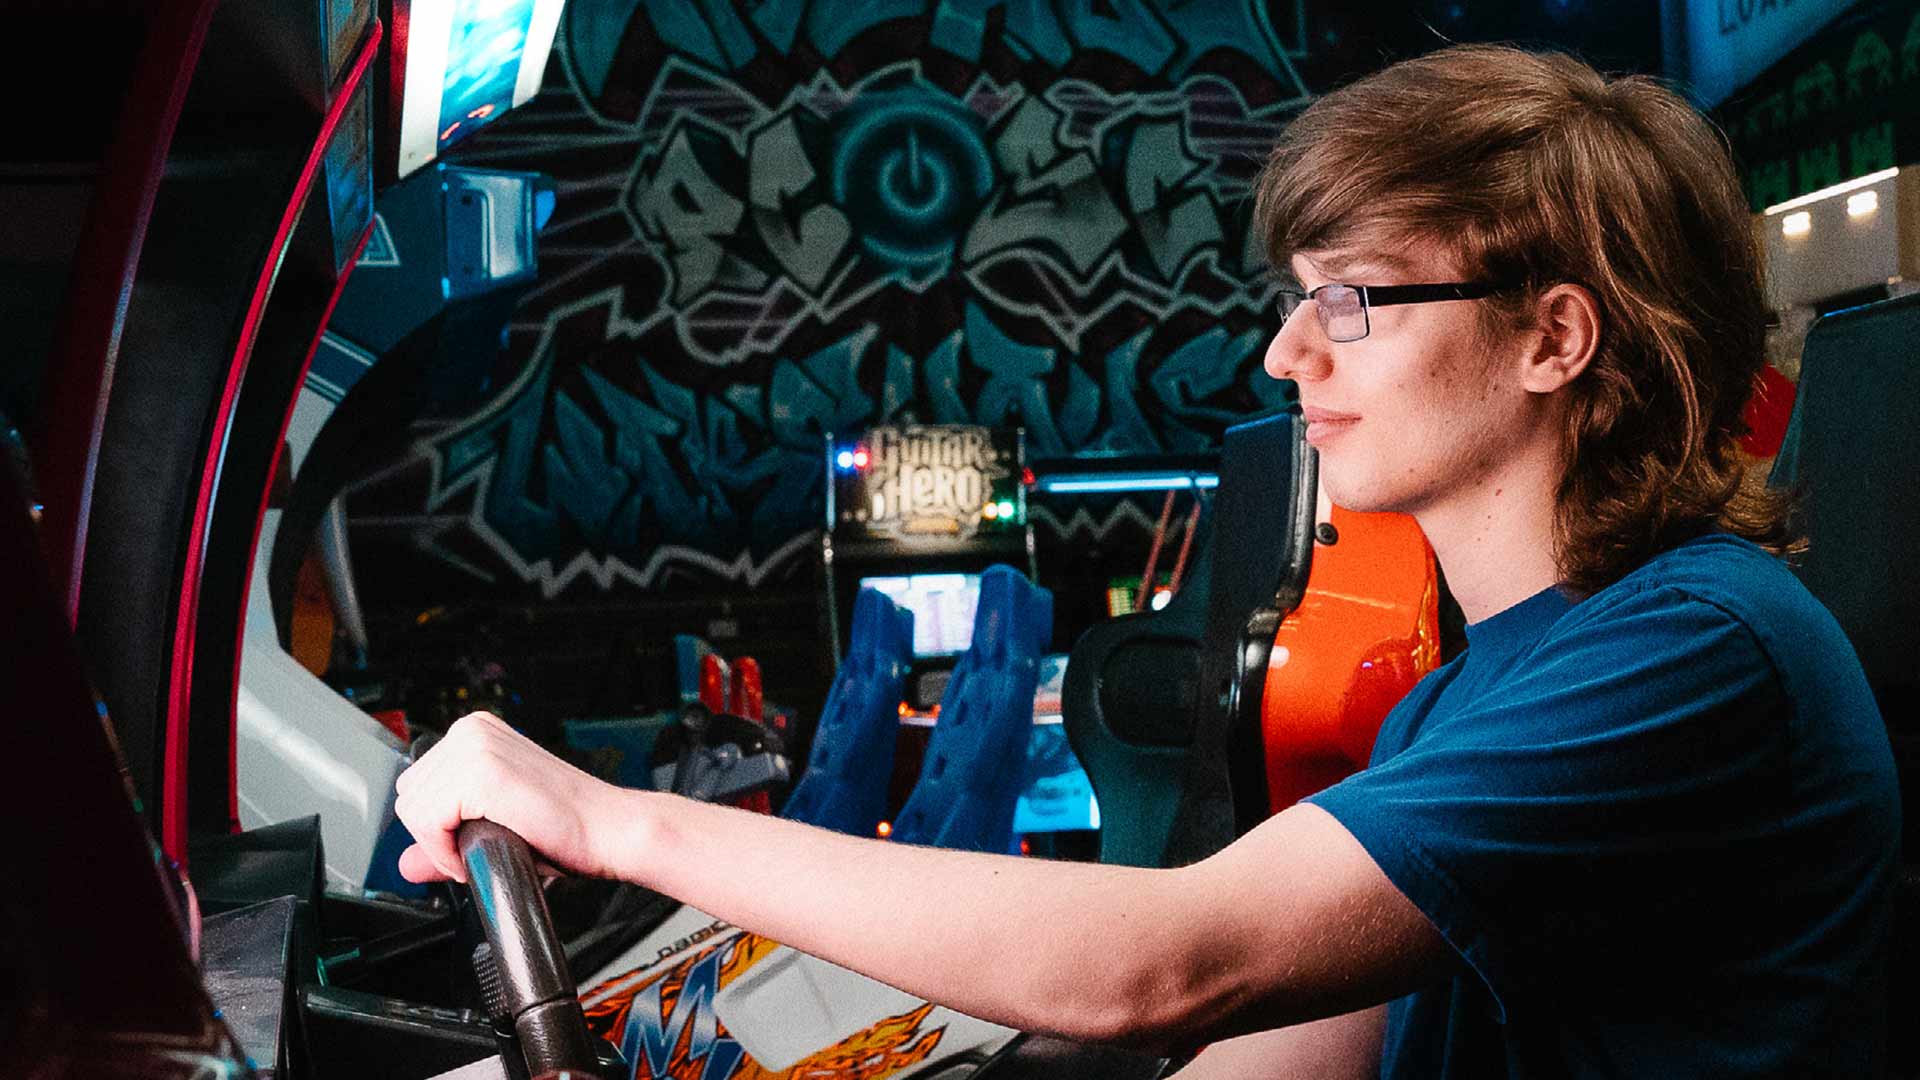 In a games arcade surrounded by multiple gaming machines, student Kenny sits at a racing car game with hands on the steering wheel. In the distance a wall at the back of the room features a stylised power button and graffiti text artwork